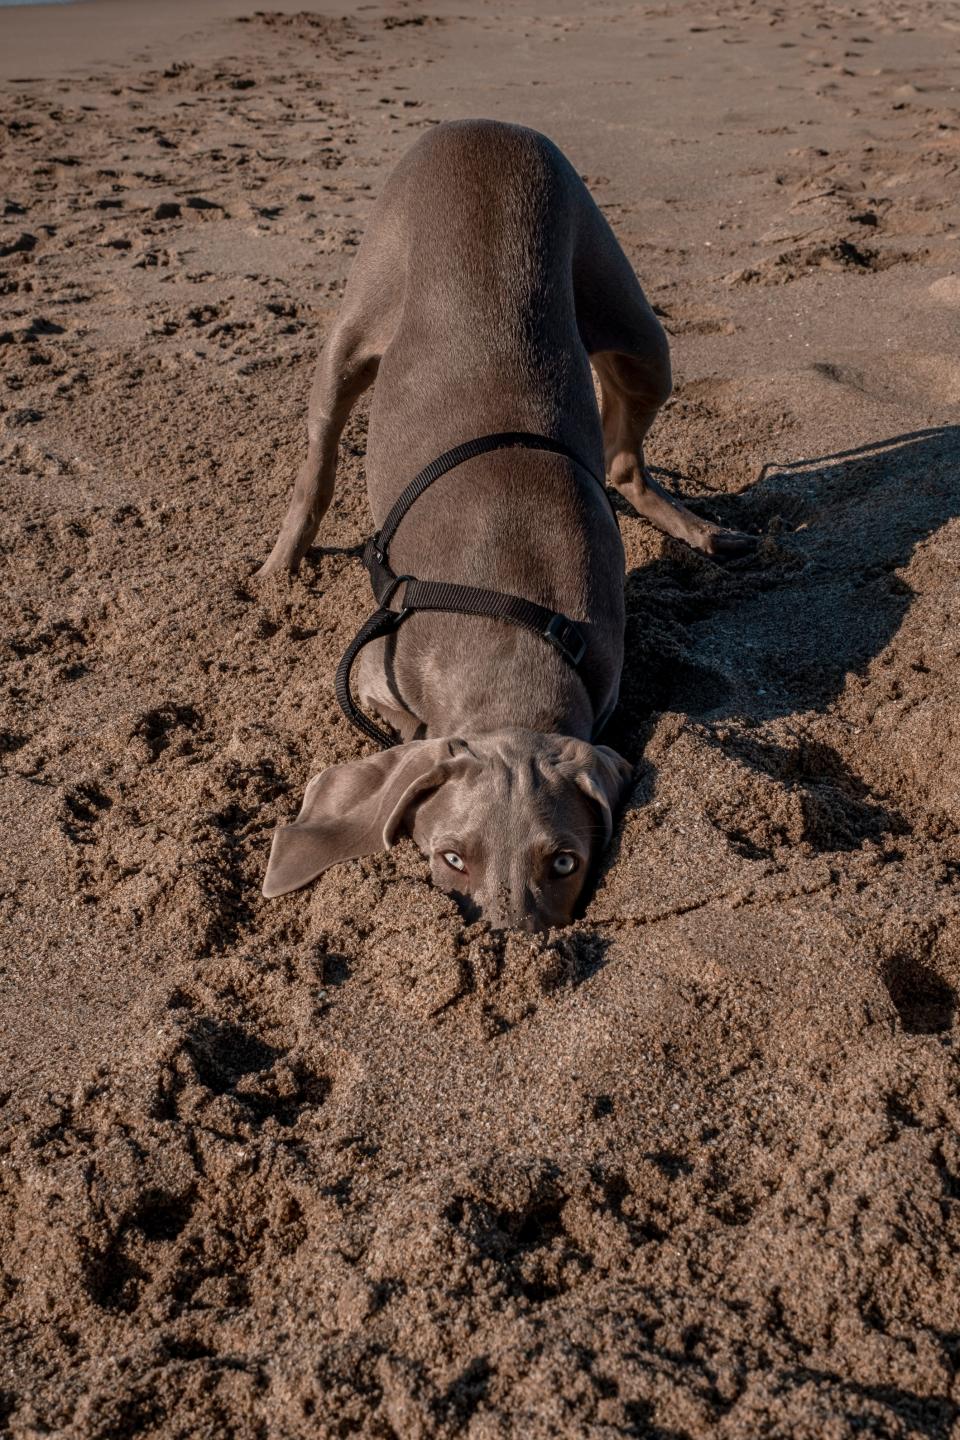 A dog burrows its mouth in sand at the beach.